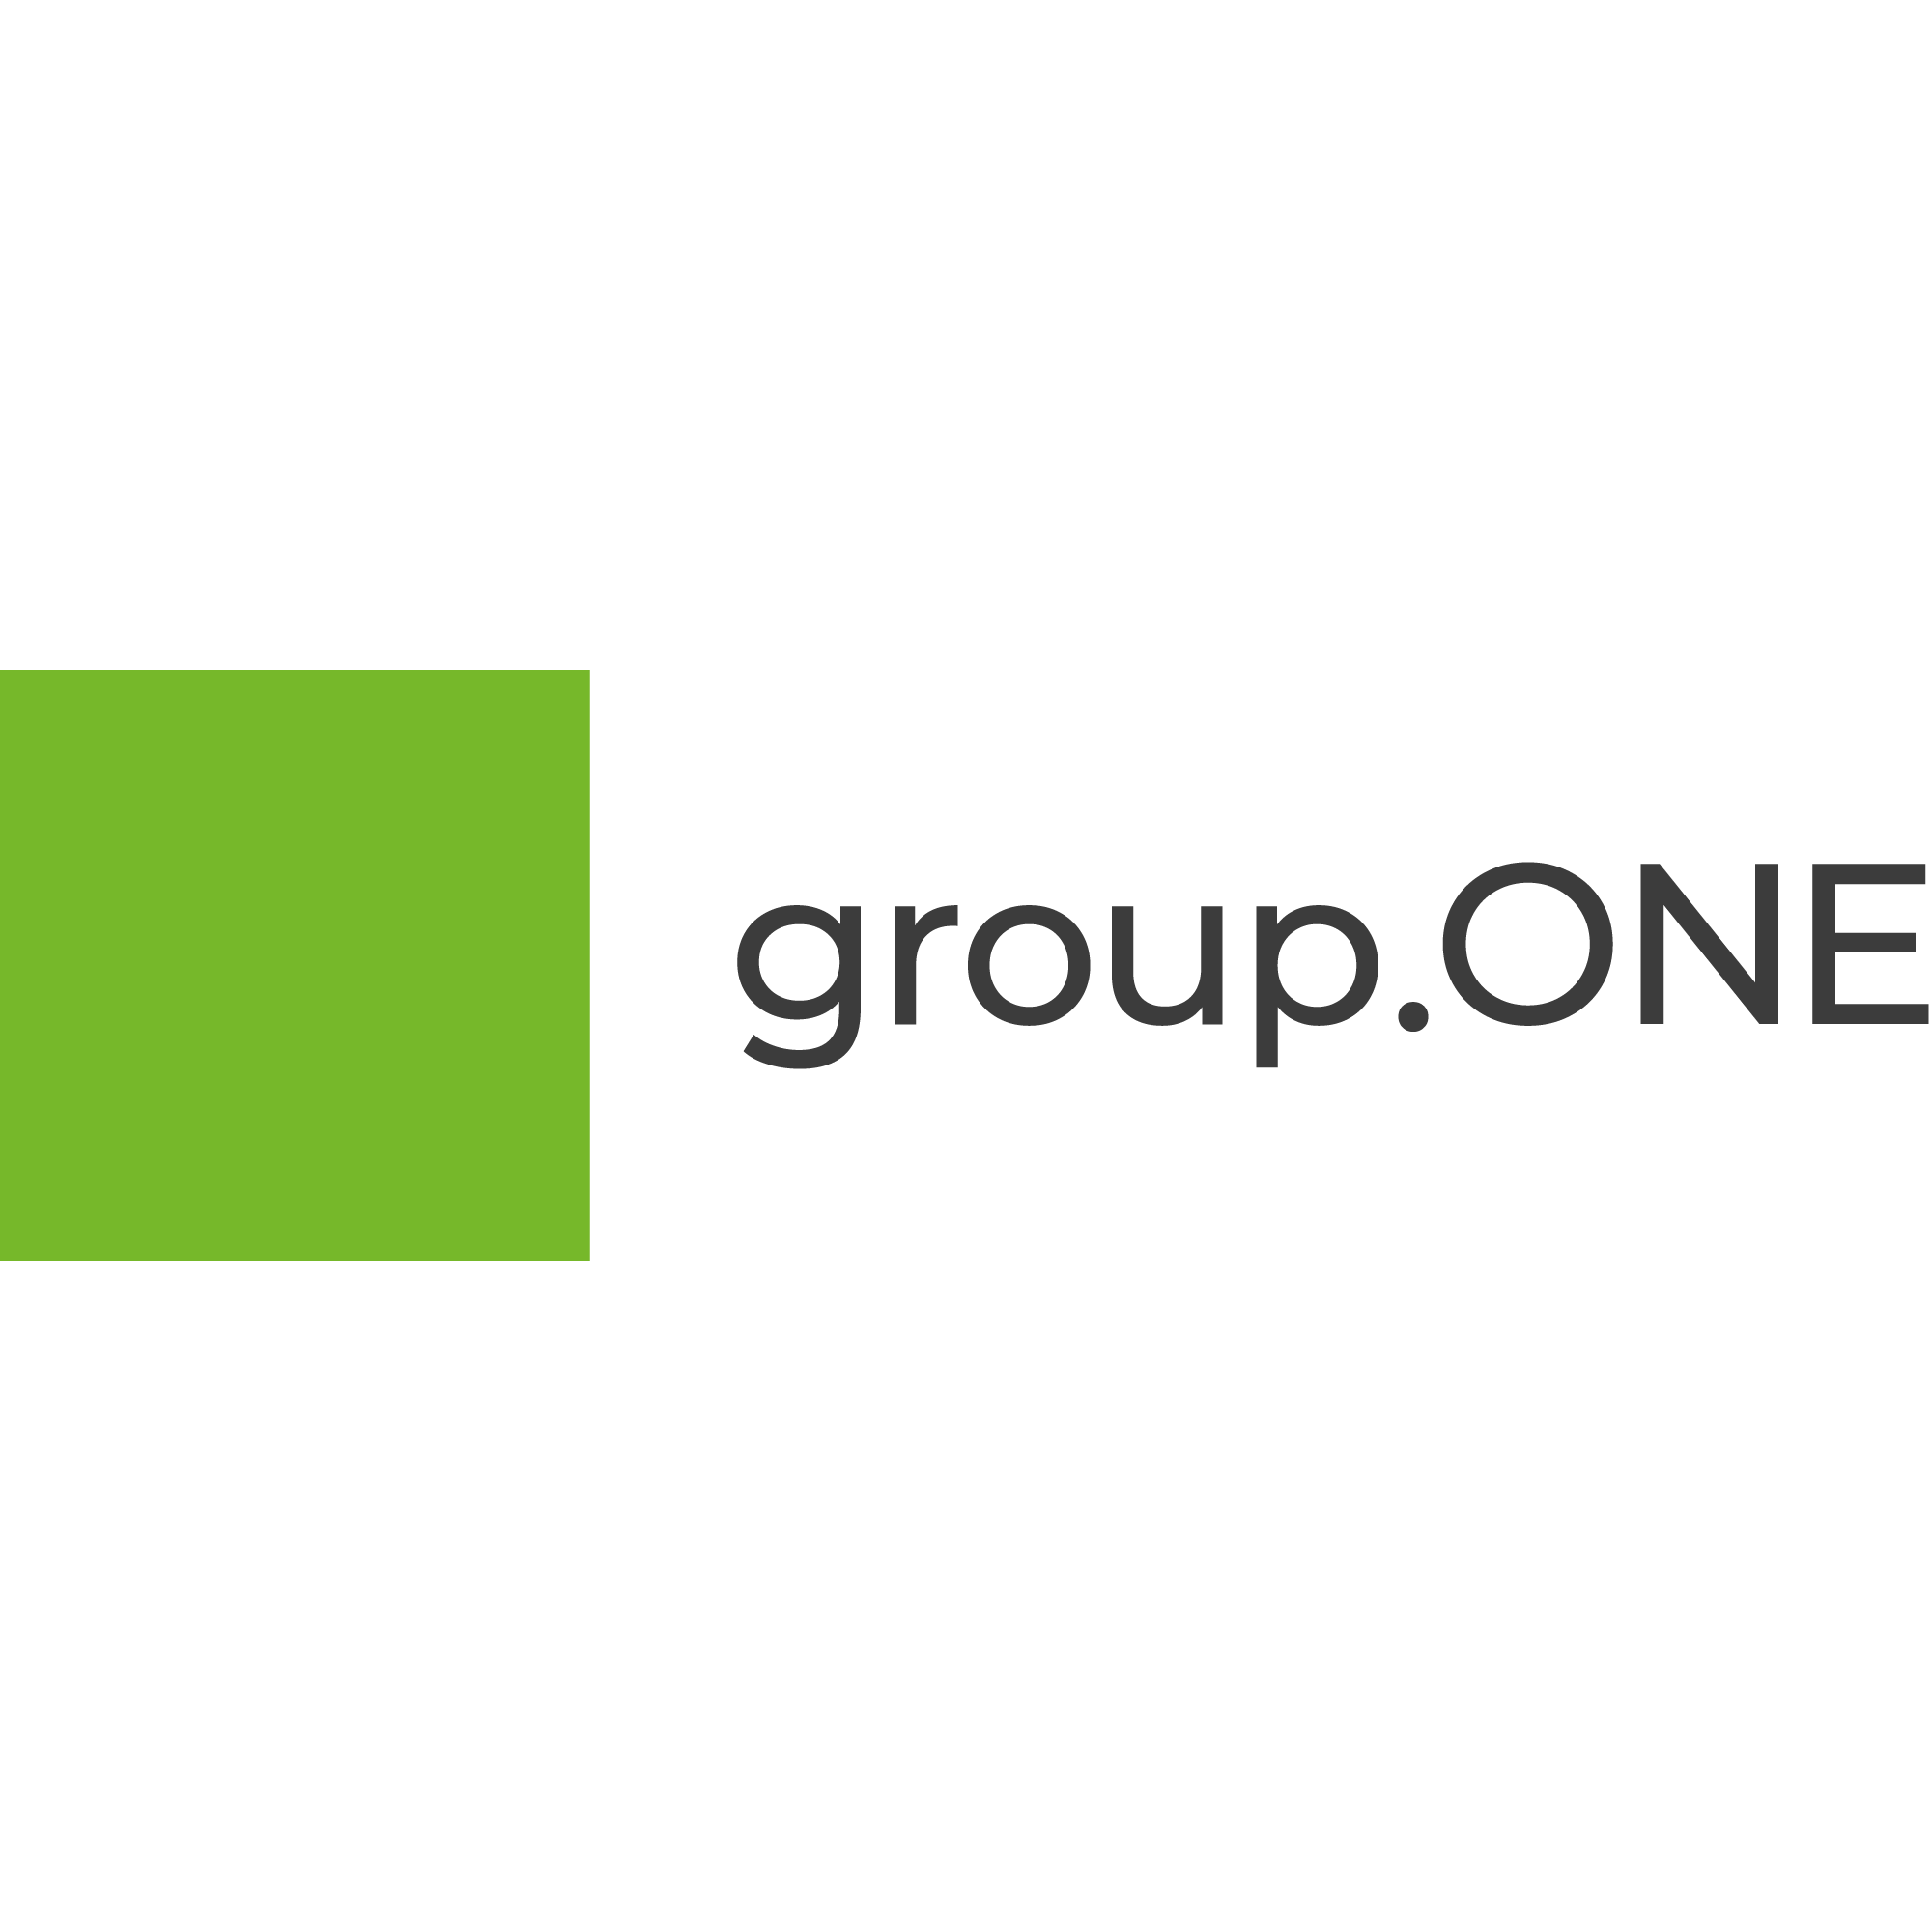 Group.one